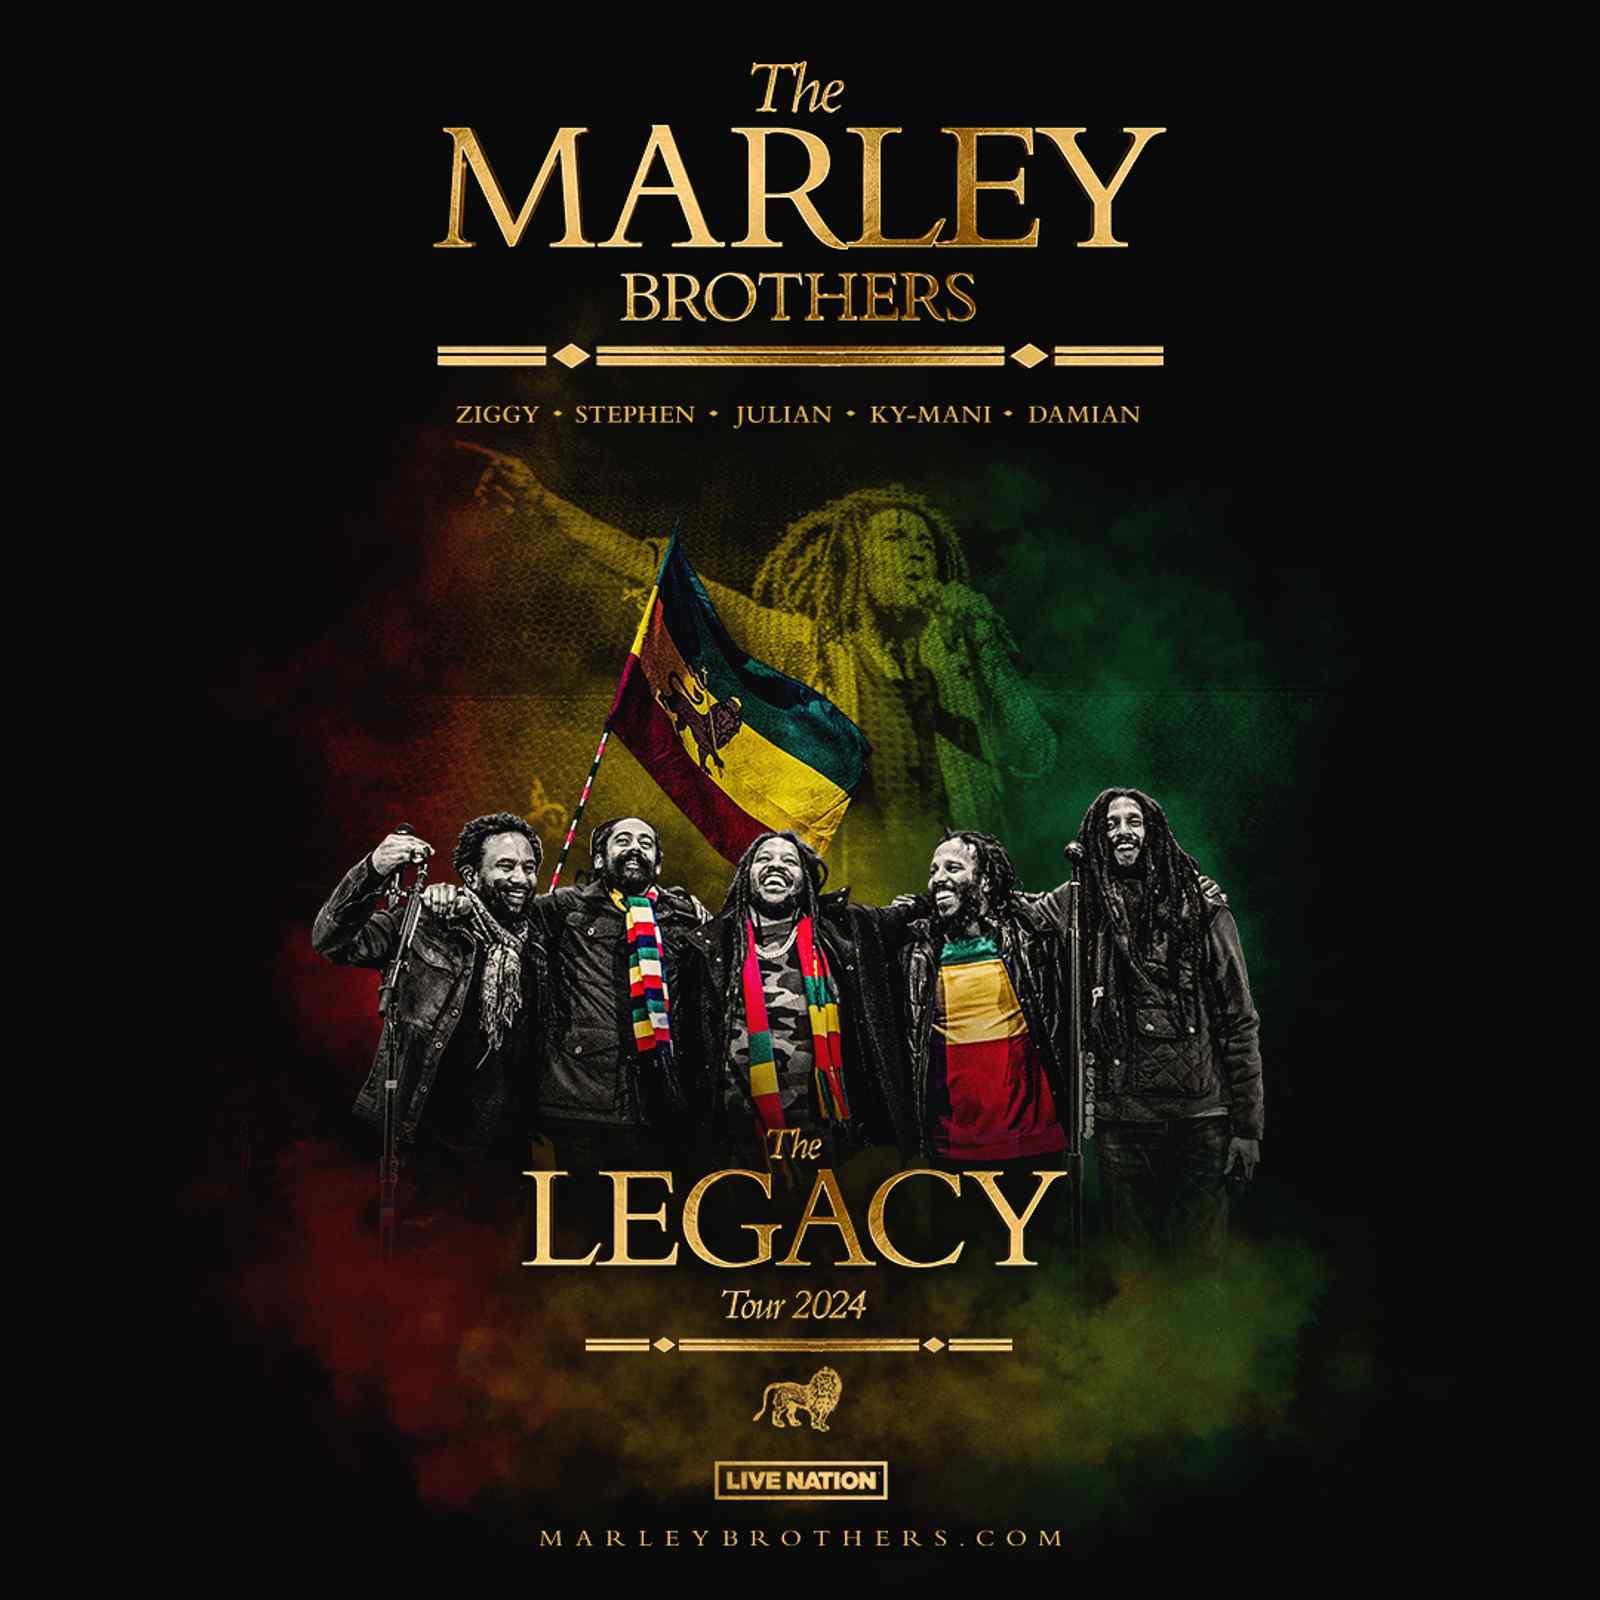 The Marley Brothers Legacy Tour